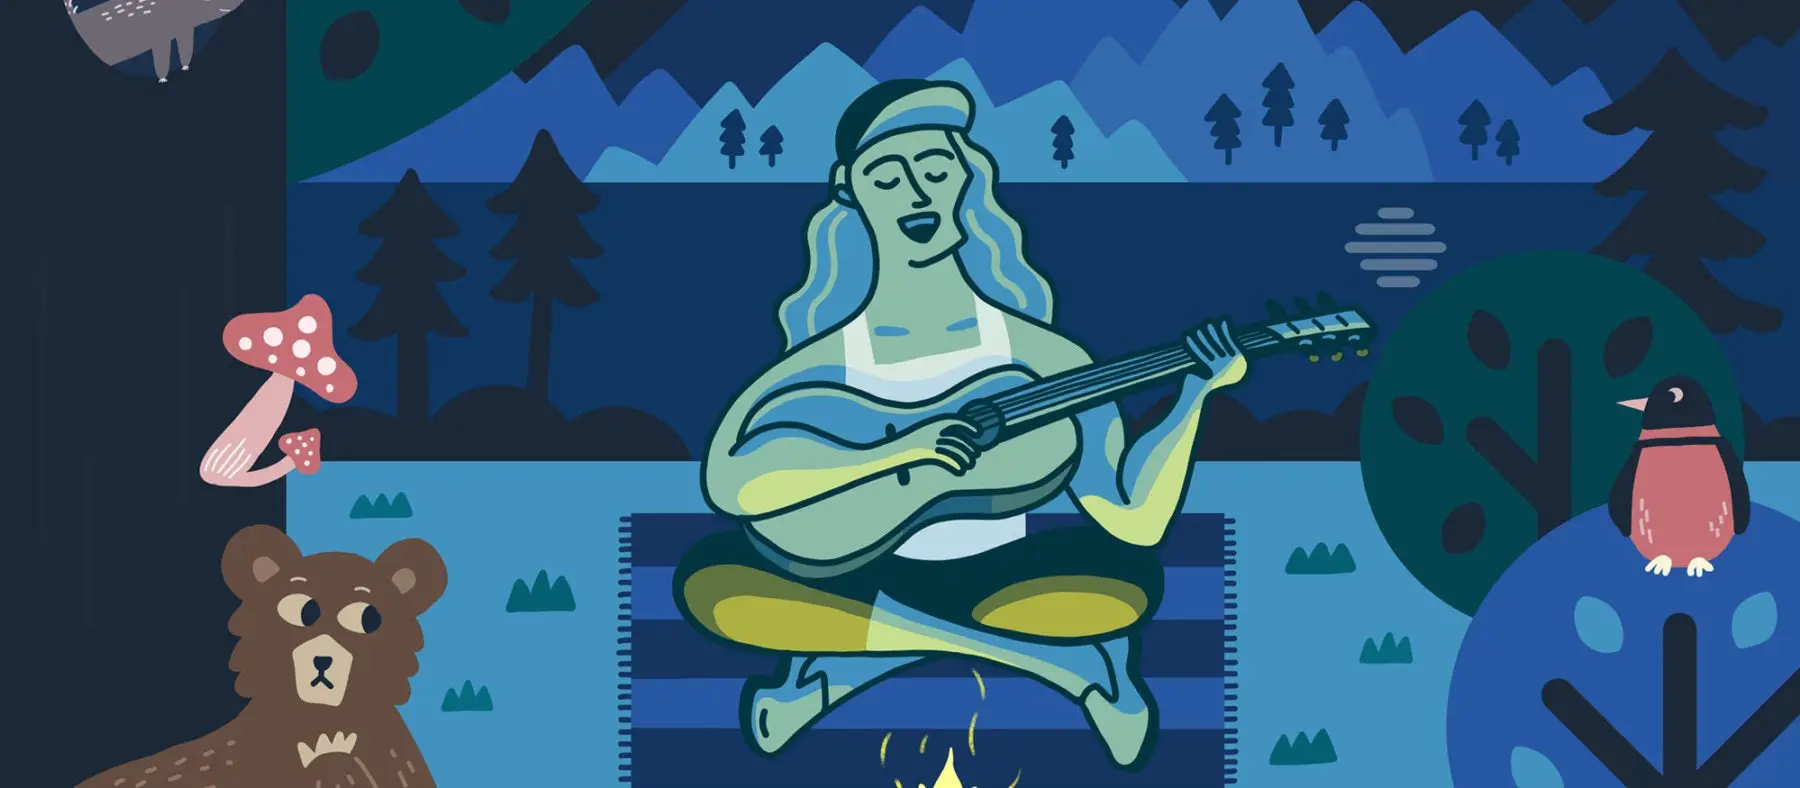 A woman playing guitar in the blue light of a campfire at dusk serenades animals from the surrounding woods.